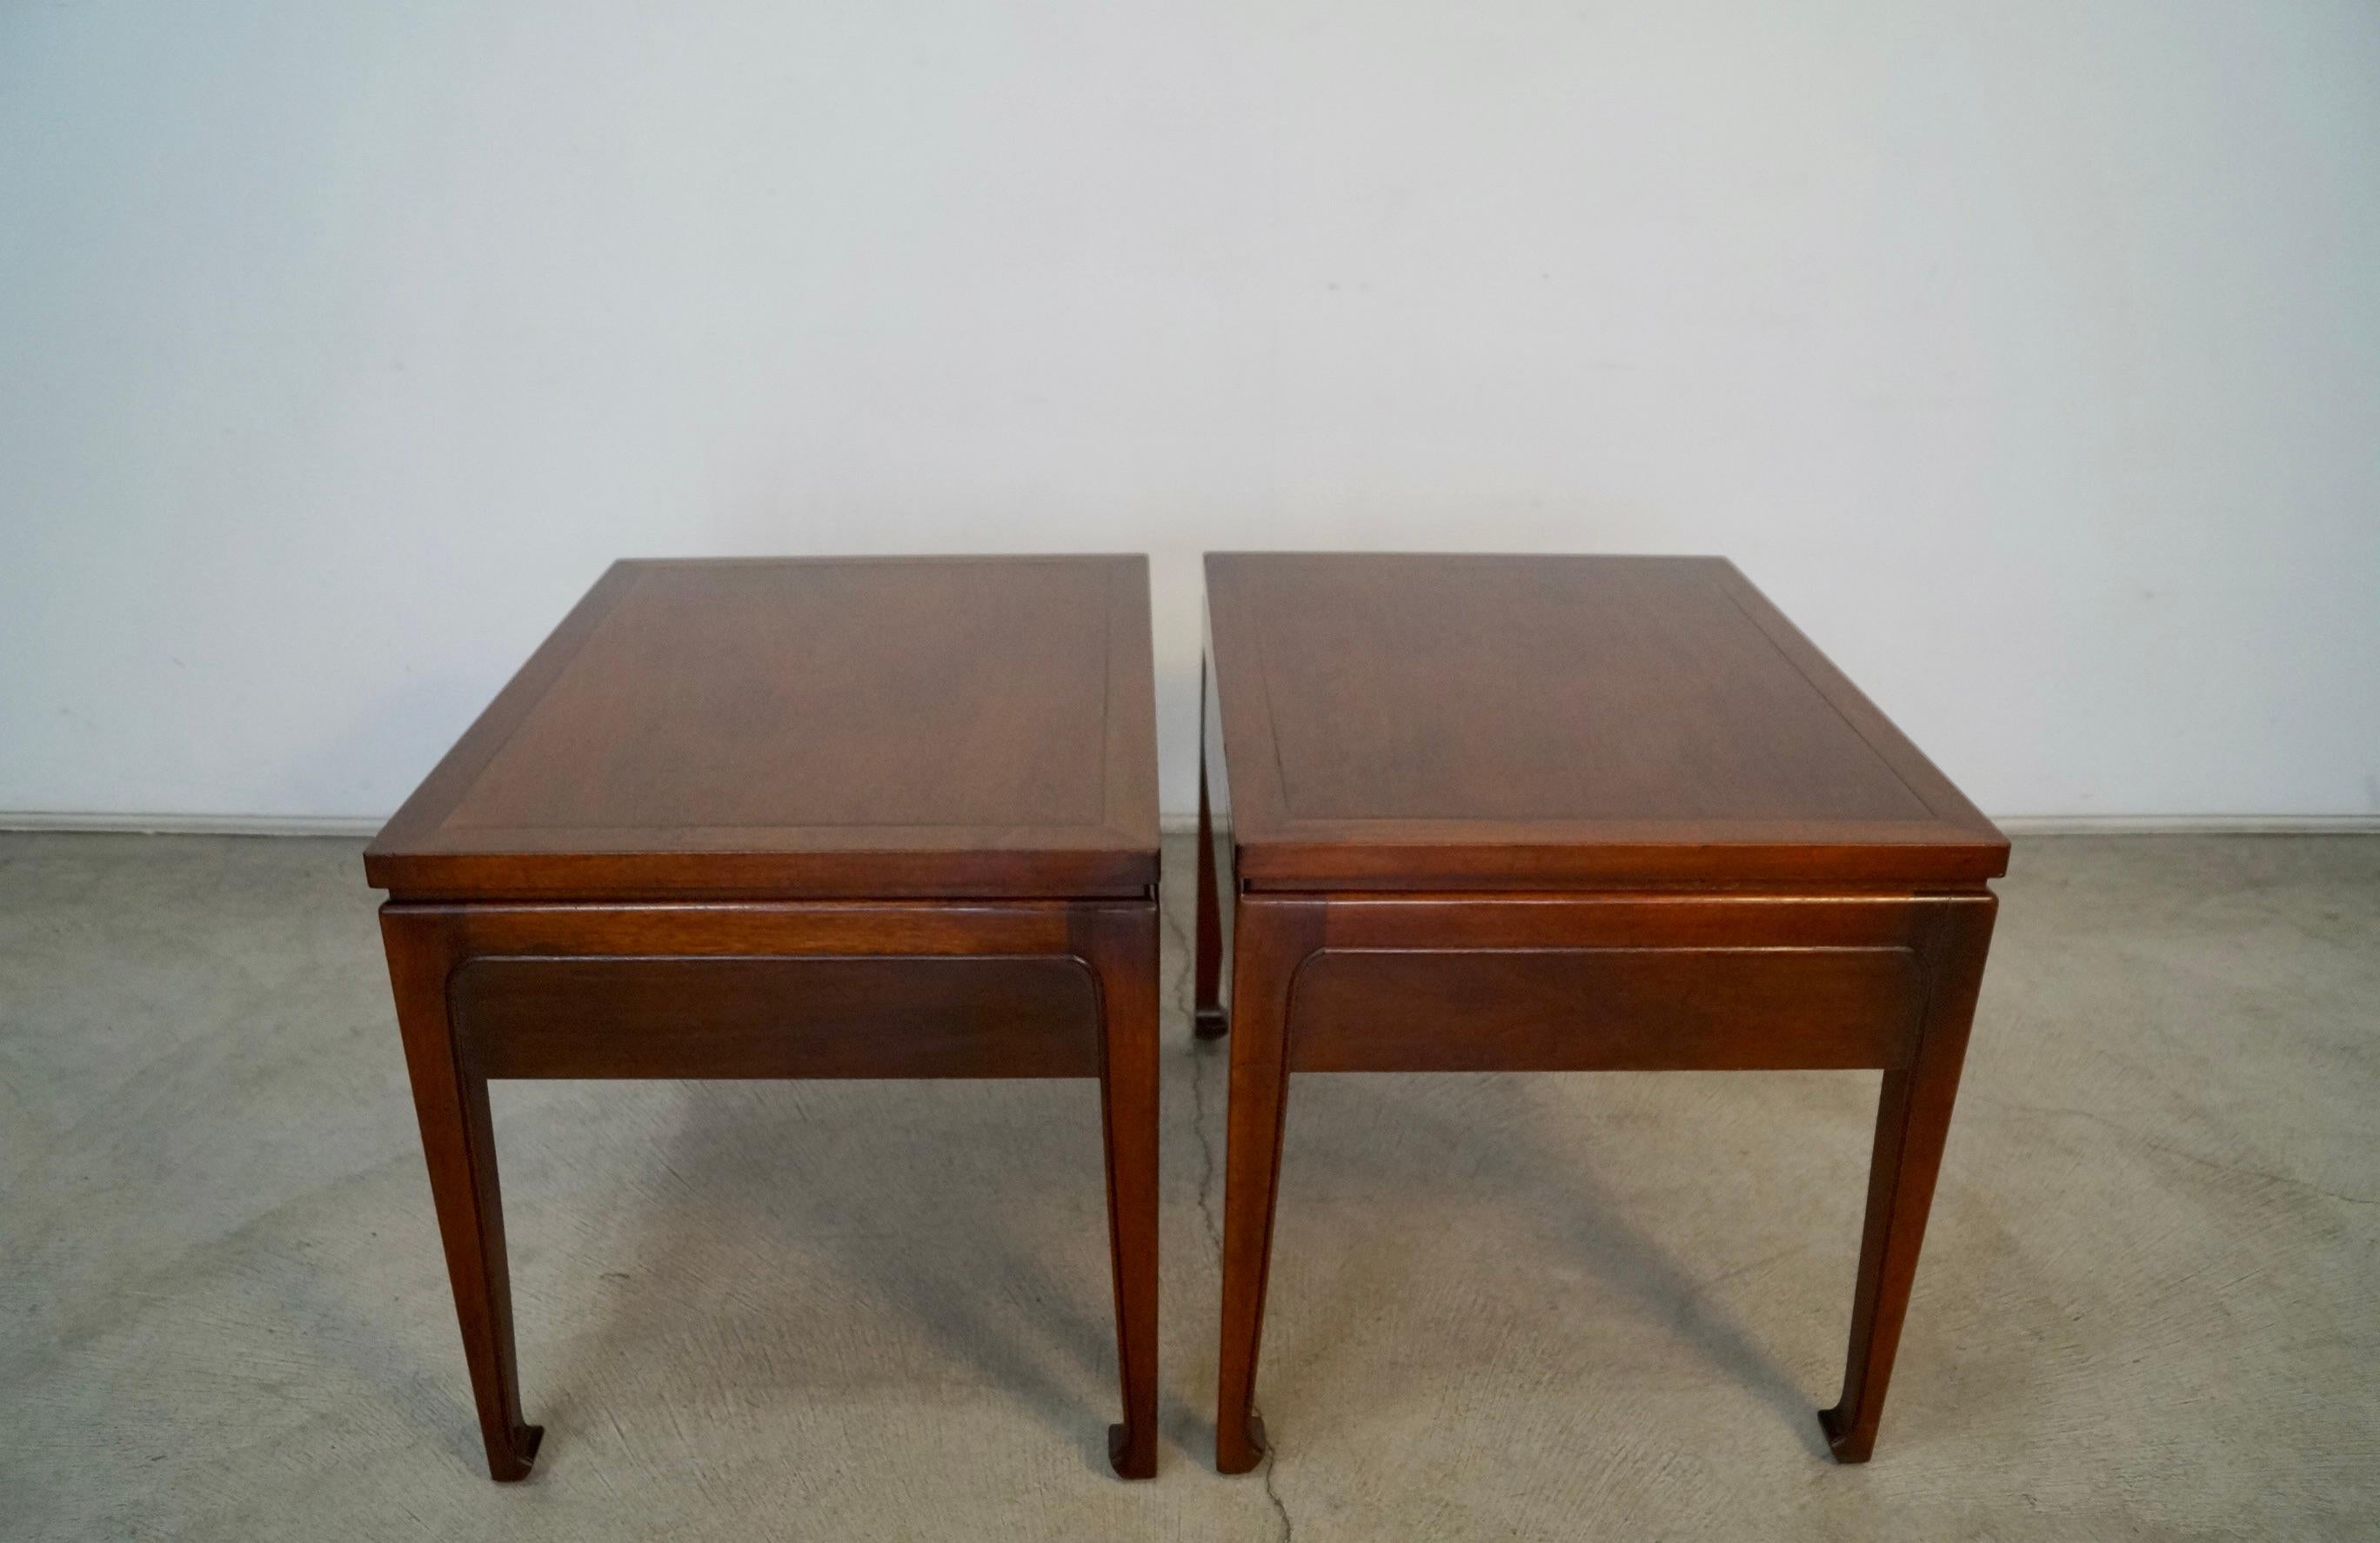 Mahogany 1950's Mid-Century Modern Fine Arts Furniture Nightstands / Side Tables - A Pair